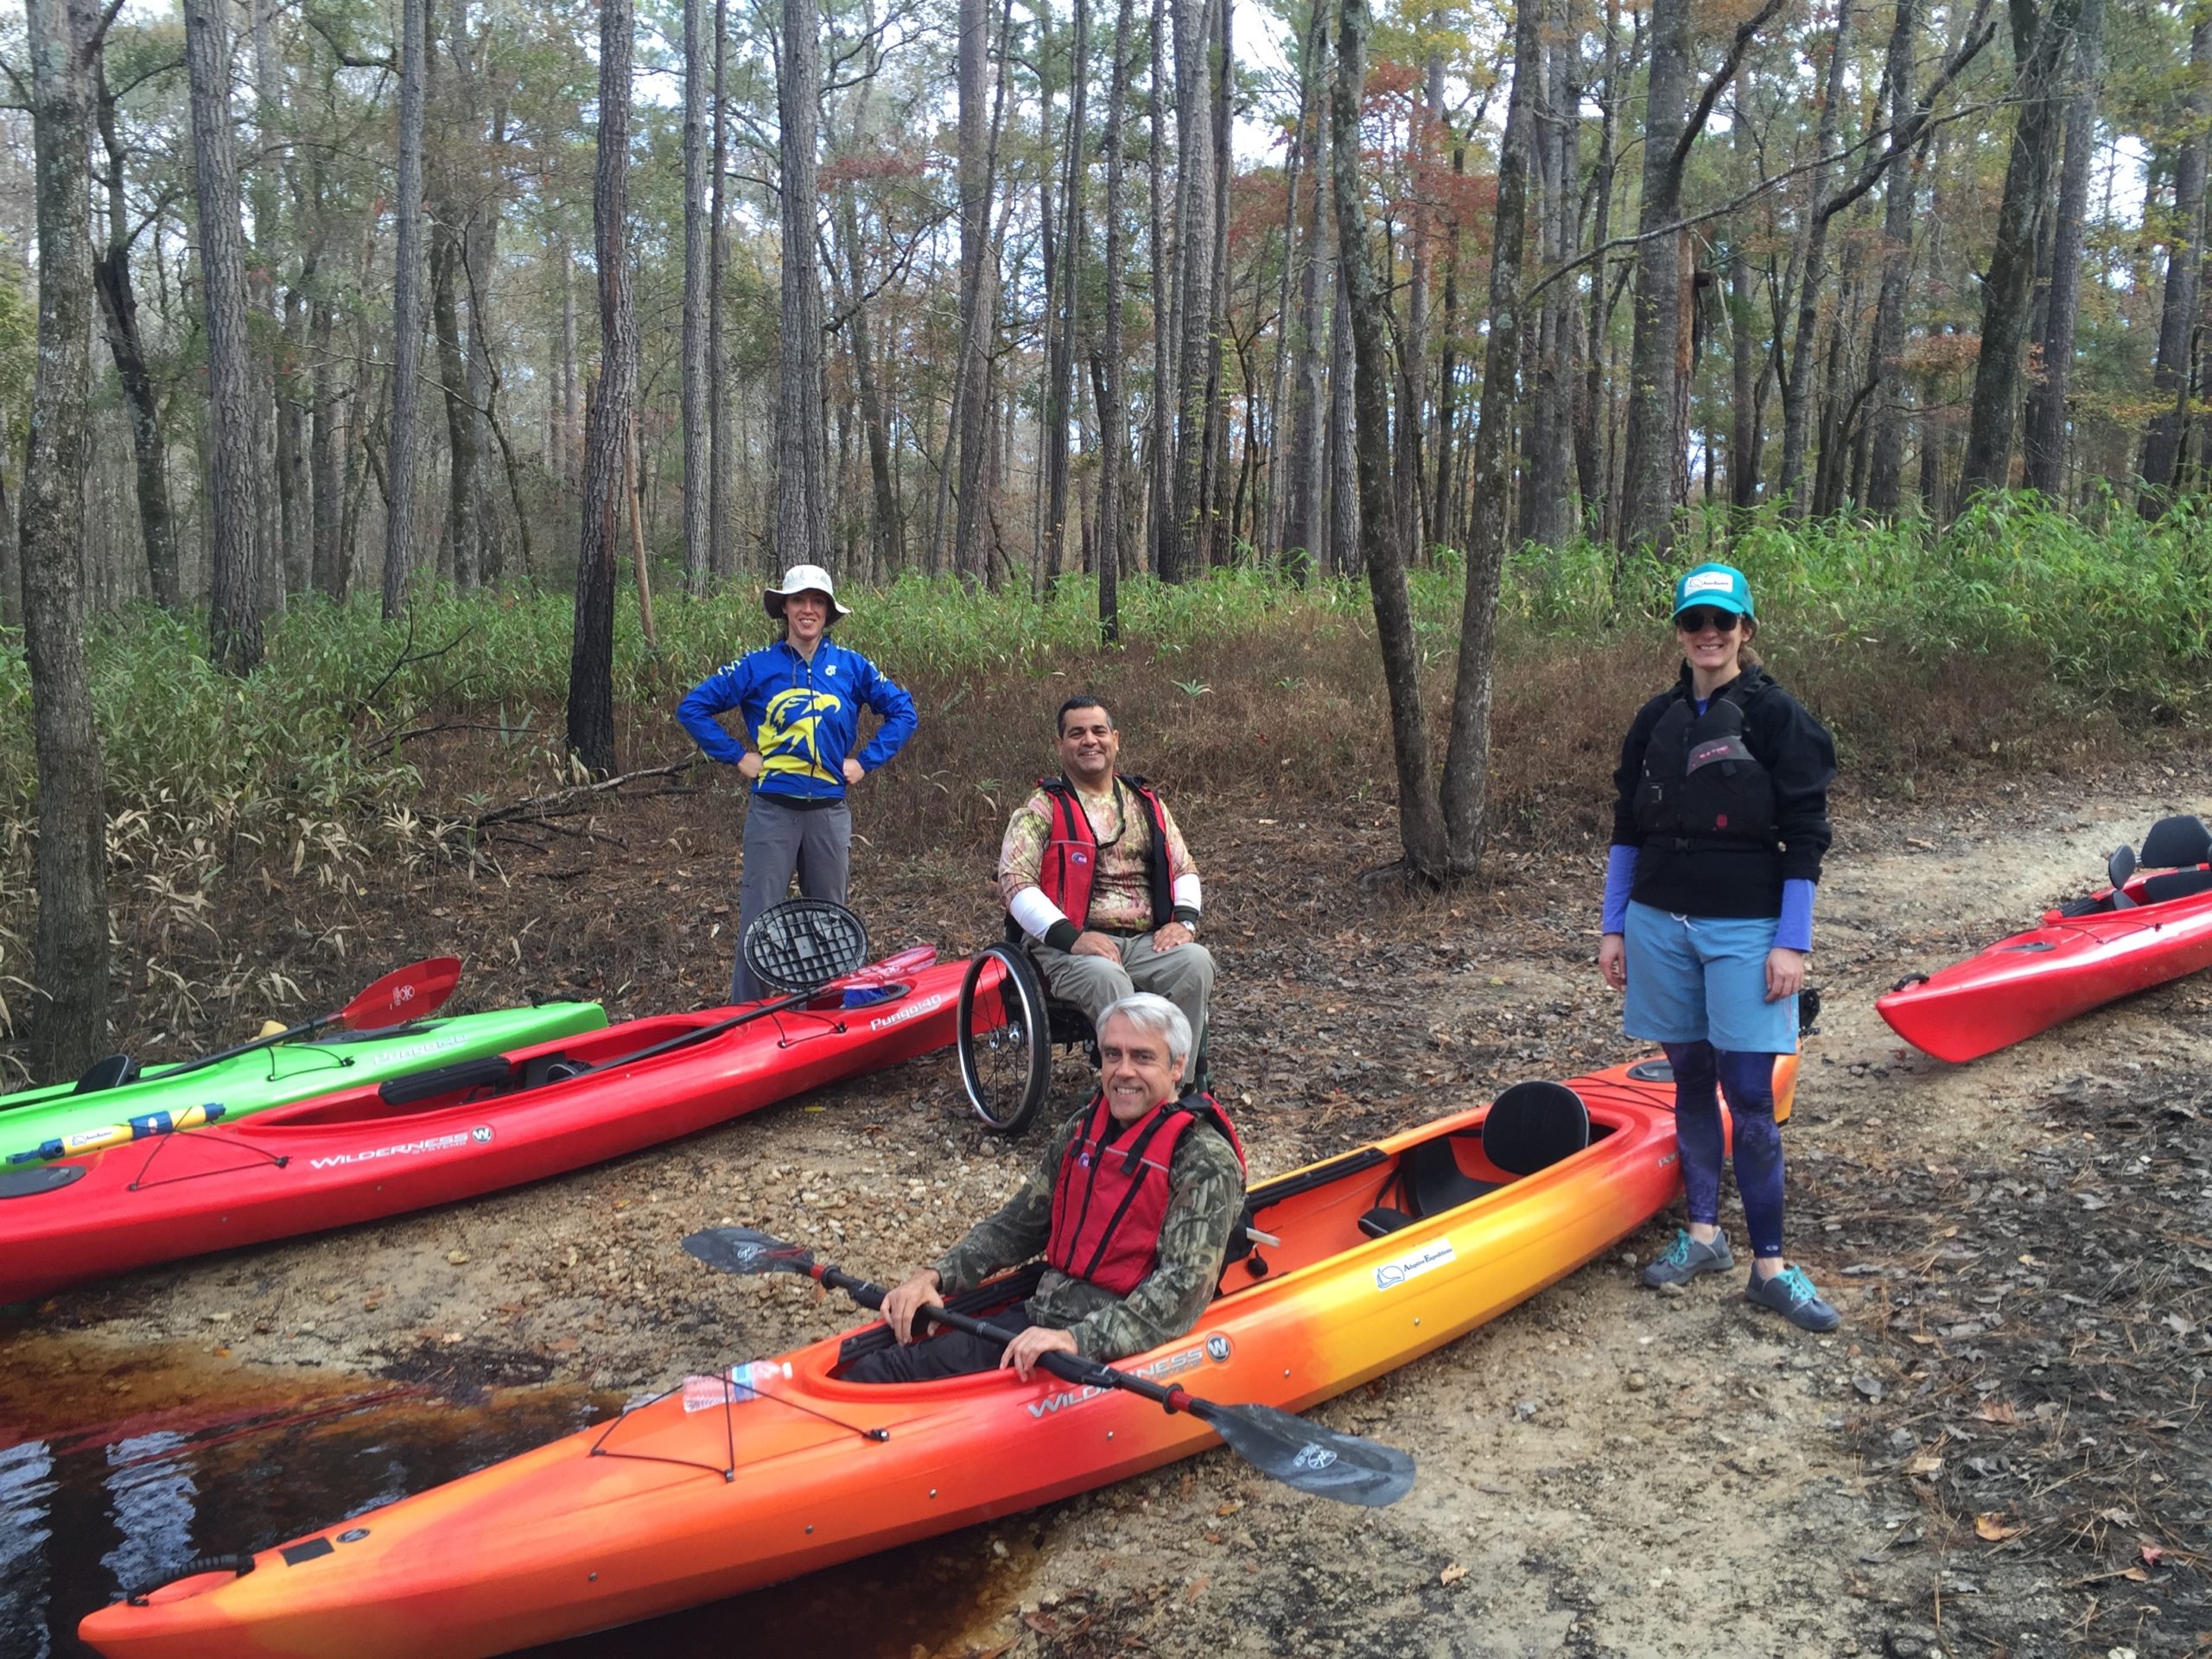 Group of people getting into kayaks smiling at the camera